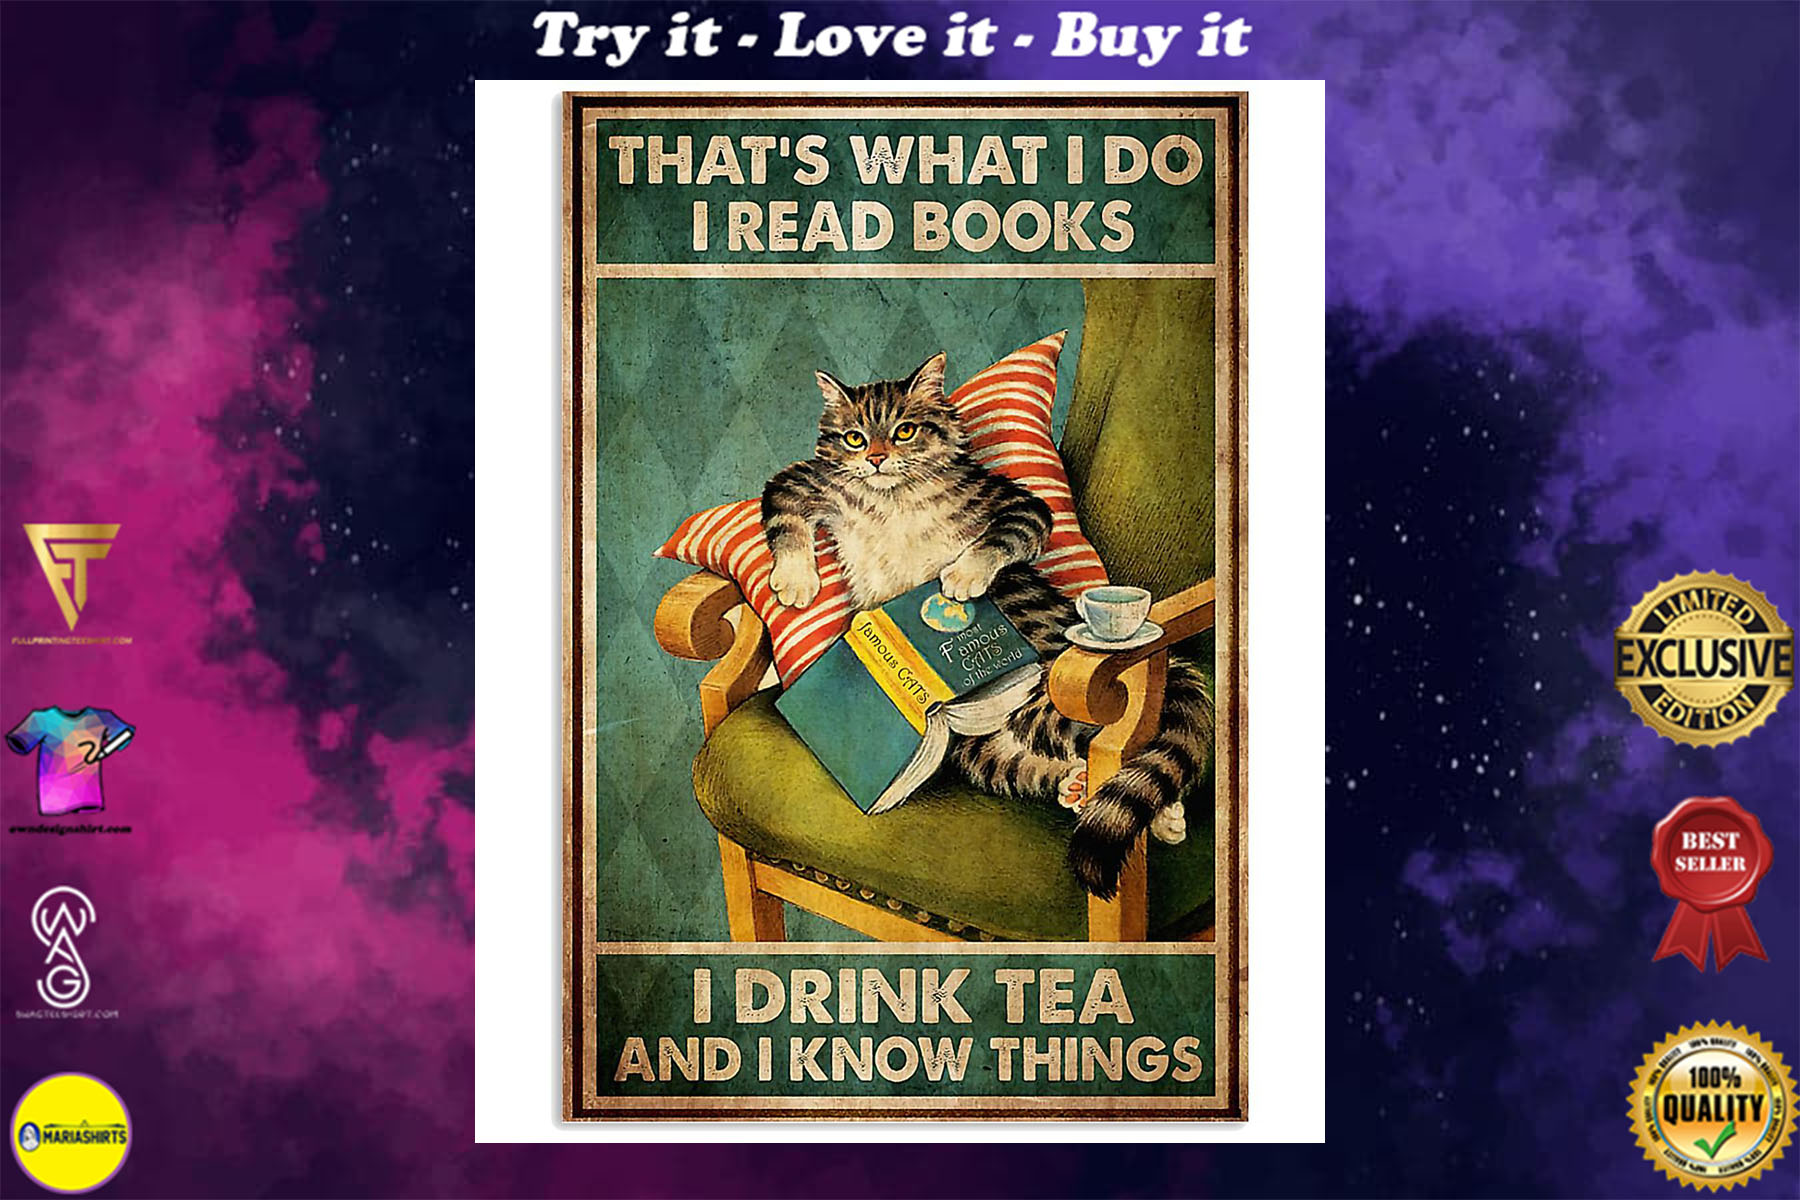 thats what i do i read books i drink tea and i know things cat retro poster